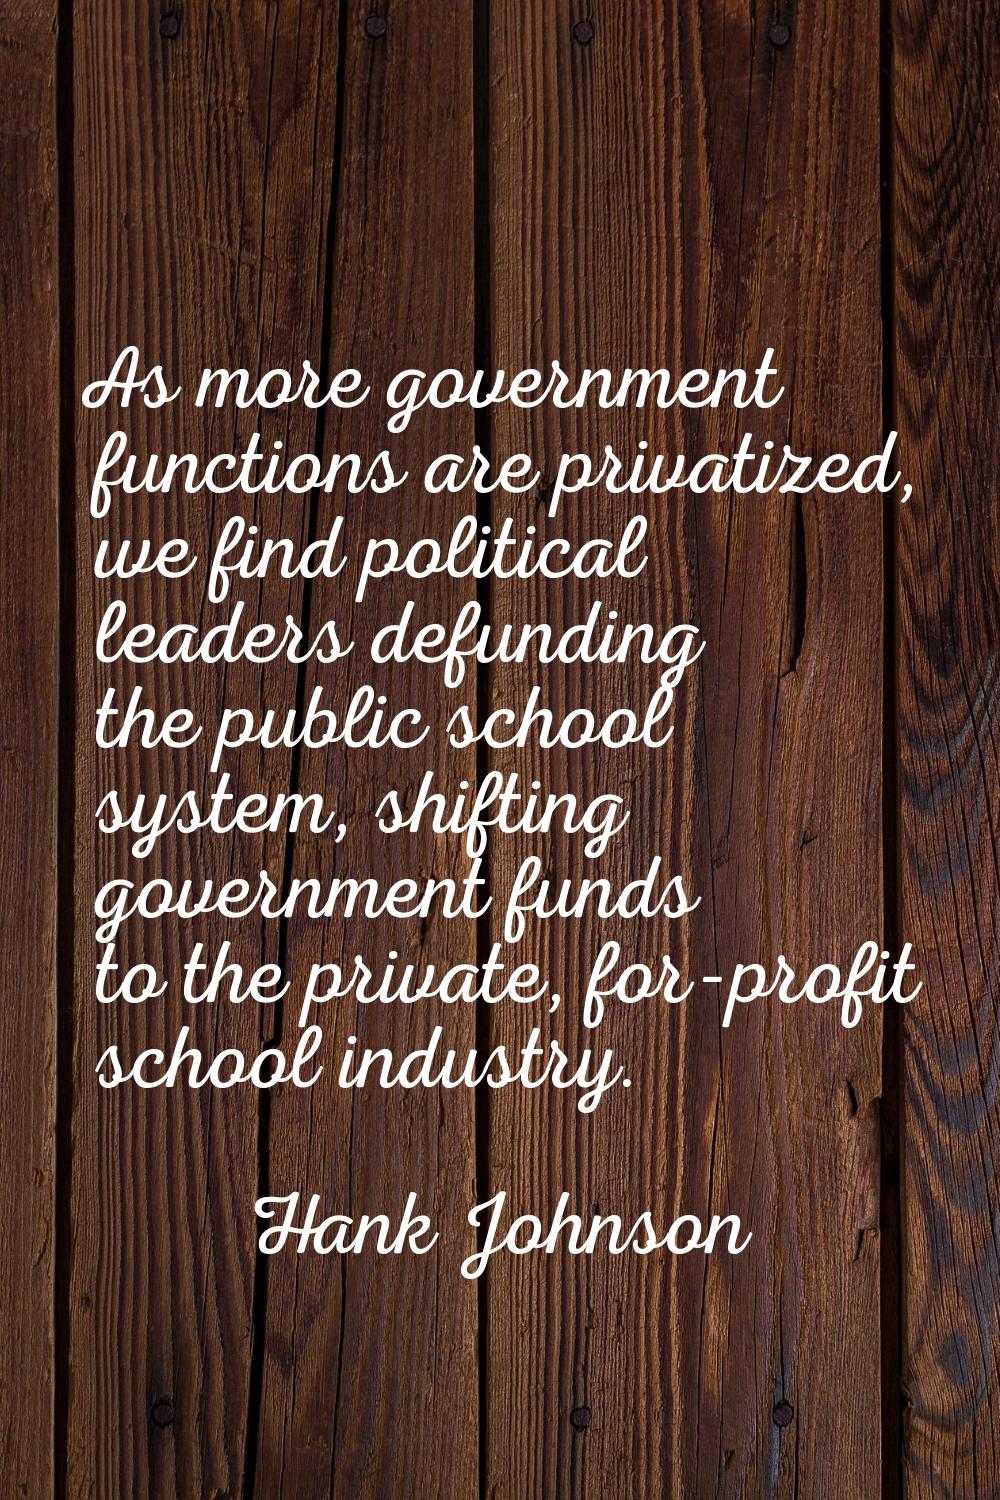 As more government functions are privatized, we find political leaders defunding the public school 